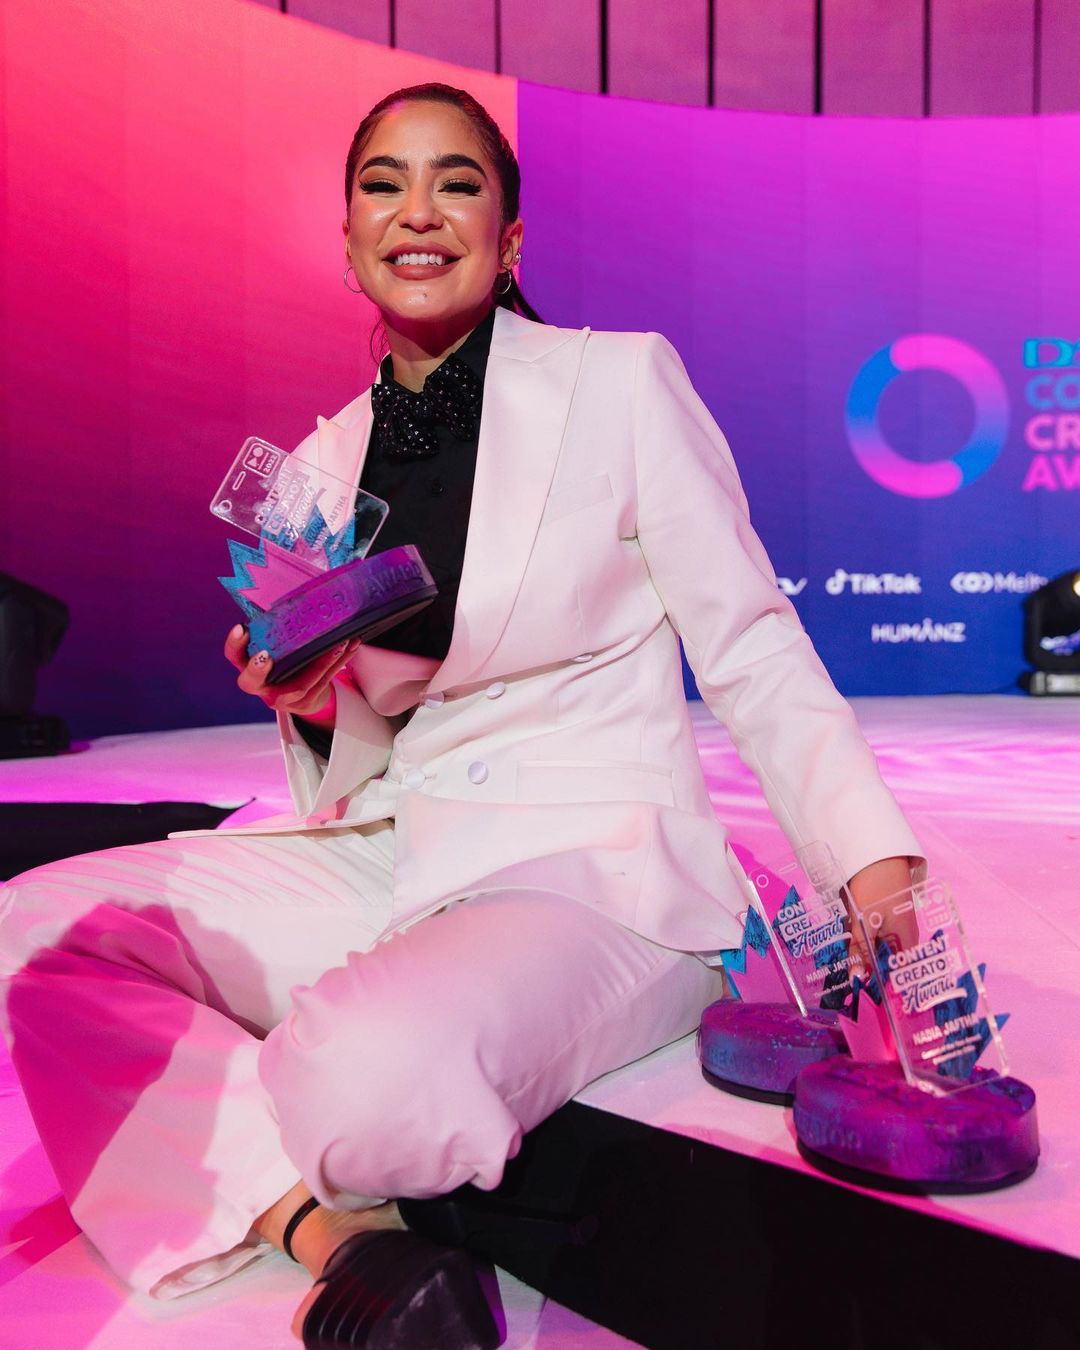 The DStv content creator awards fashion round up